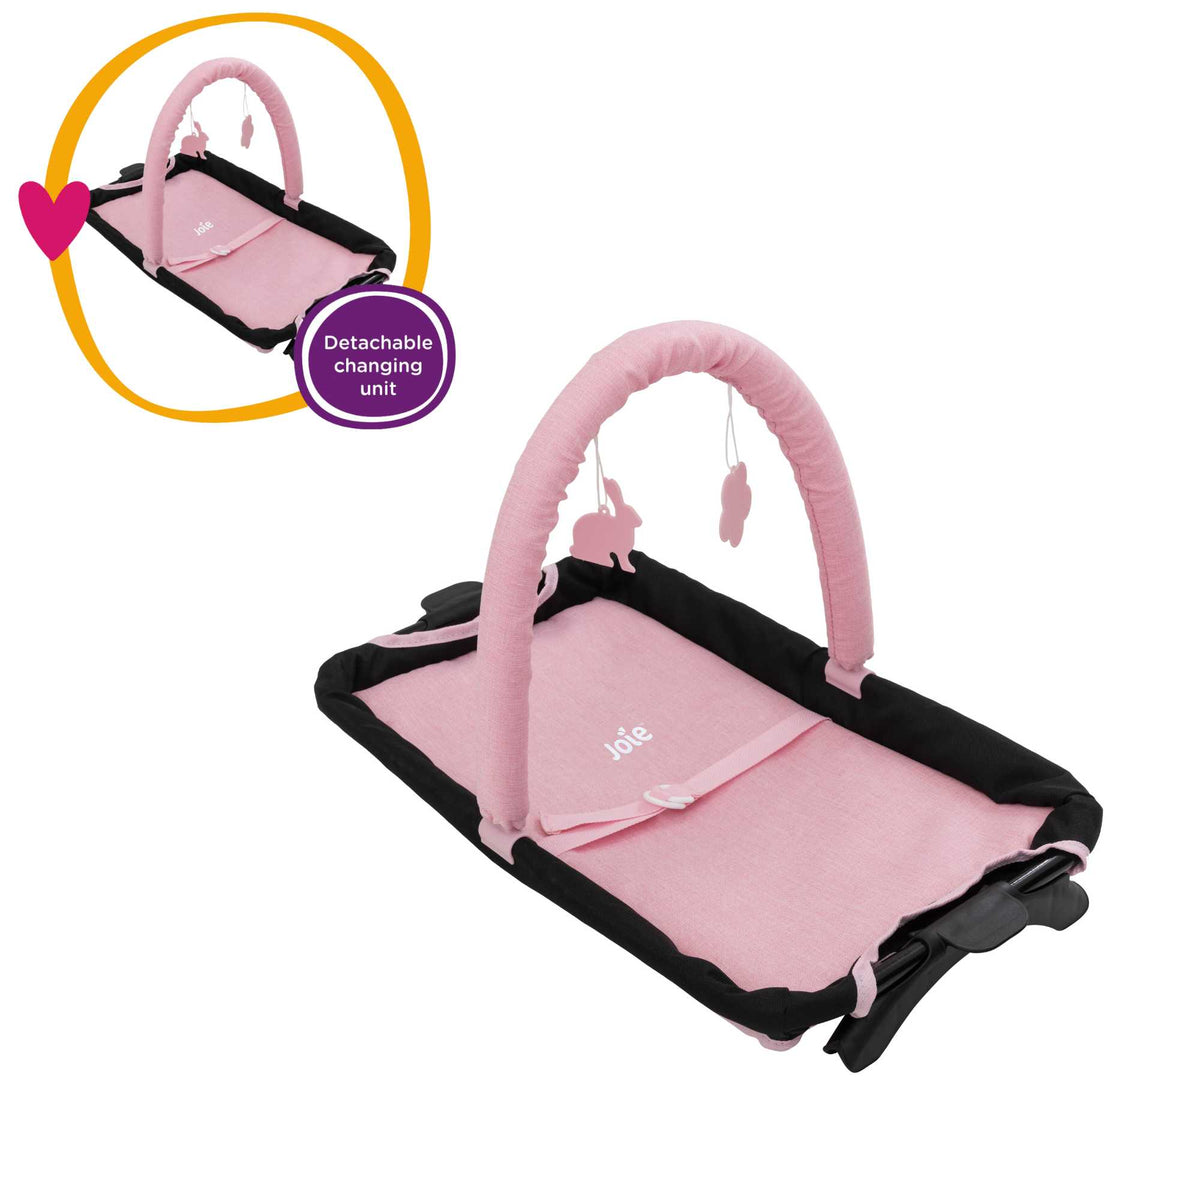 Joie Sleep &amp; Dream Dolls Travel Cot, a compact and foldable design in pink and grey, featuring breathable mesh sides and a sturdy frame, ideal for children to use for their dolls during playtime and travel